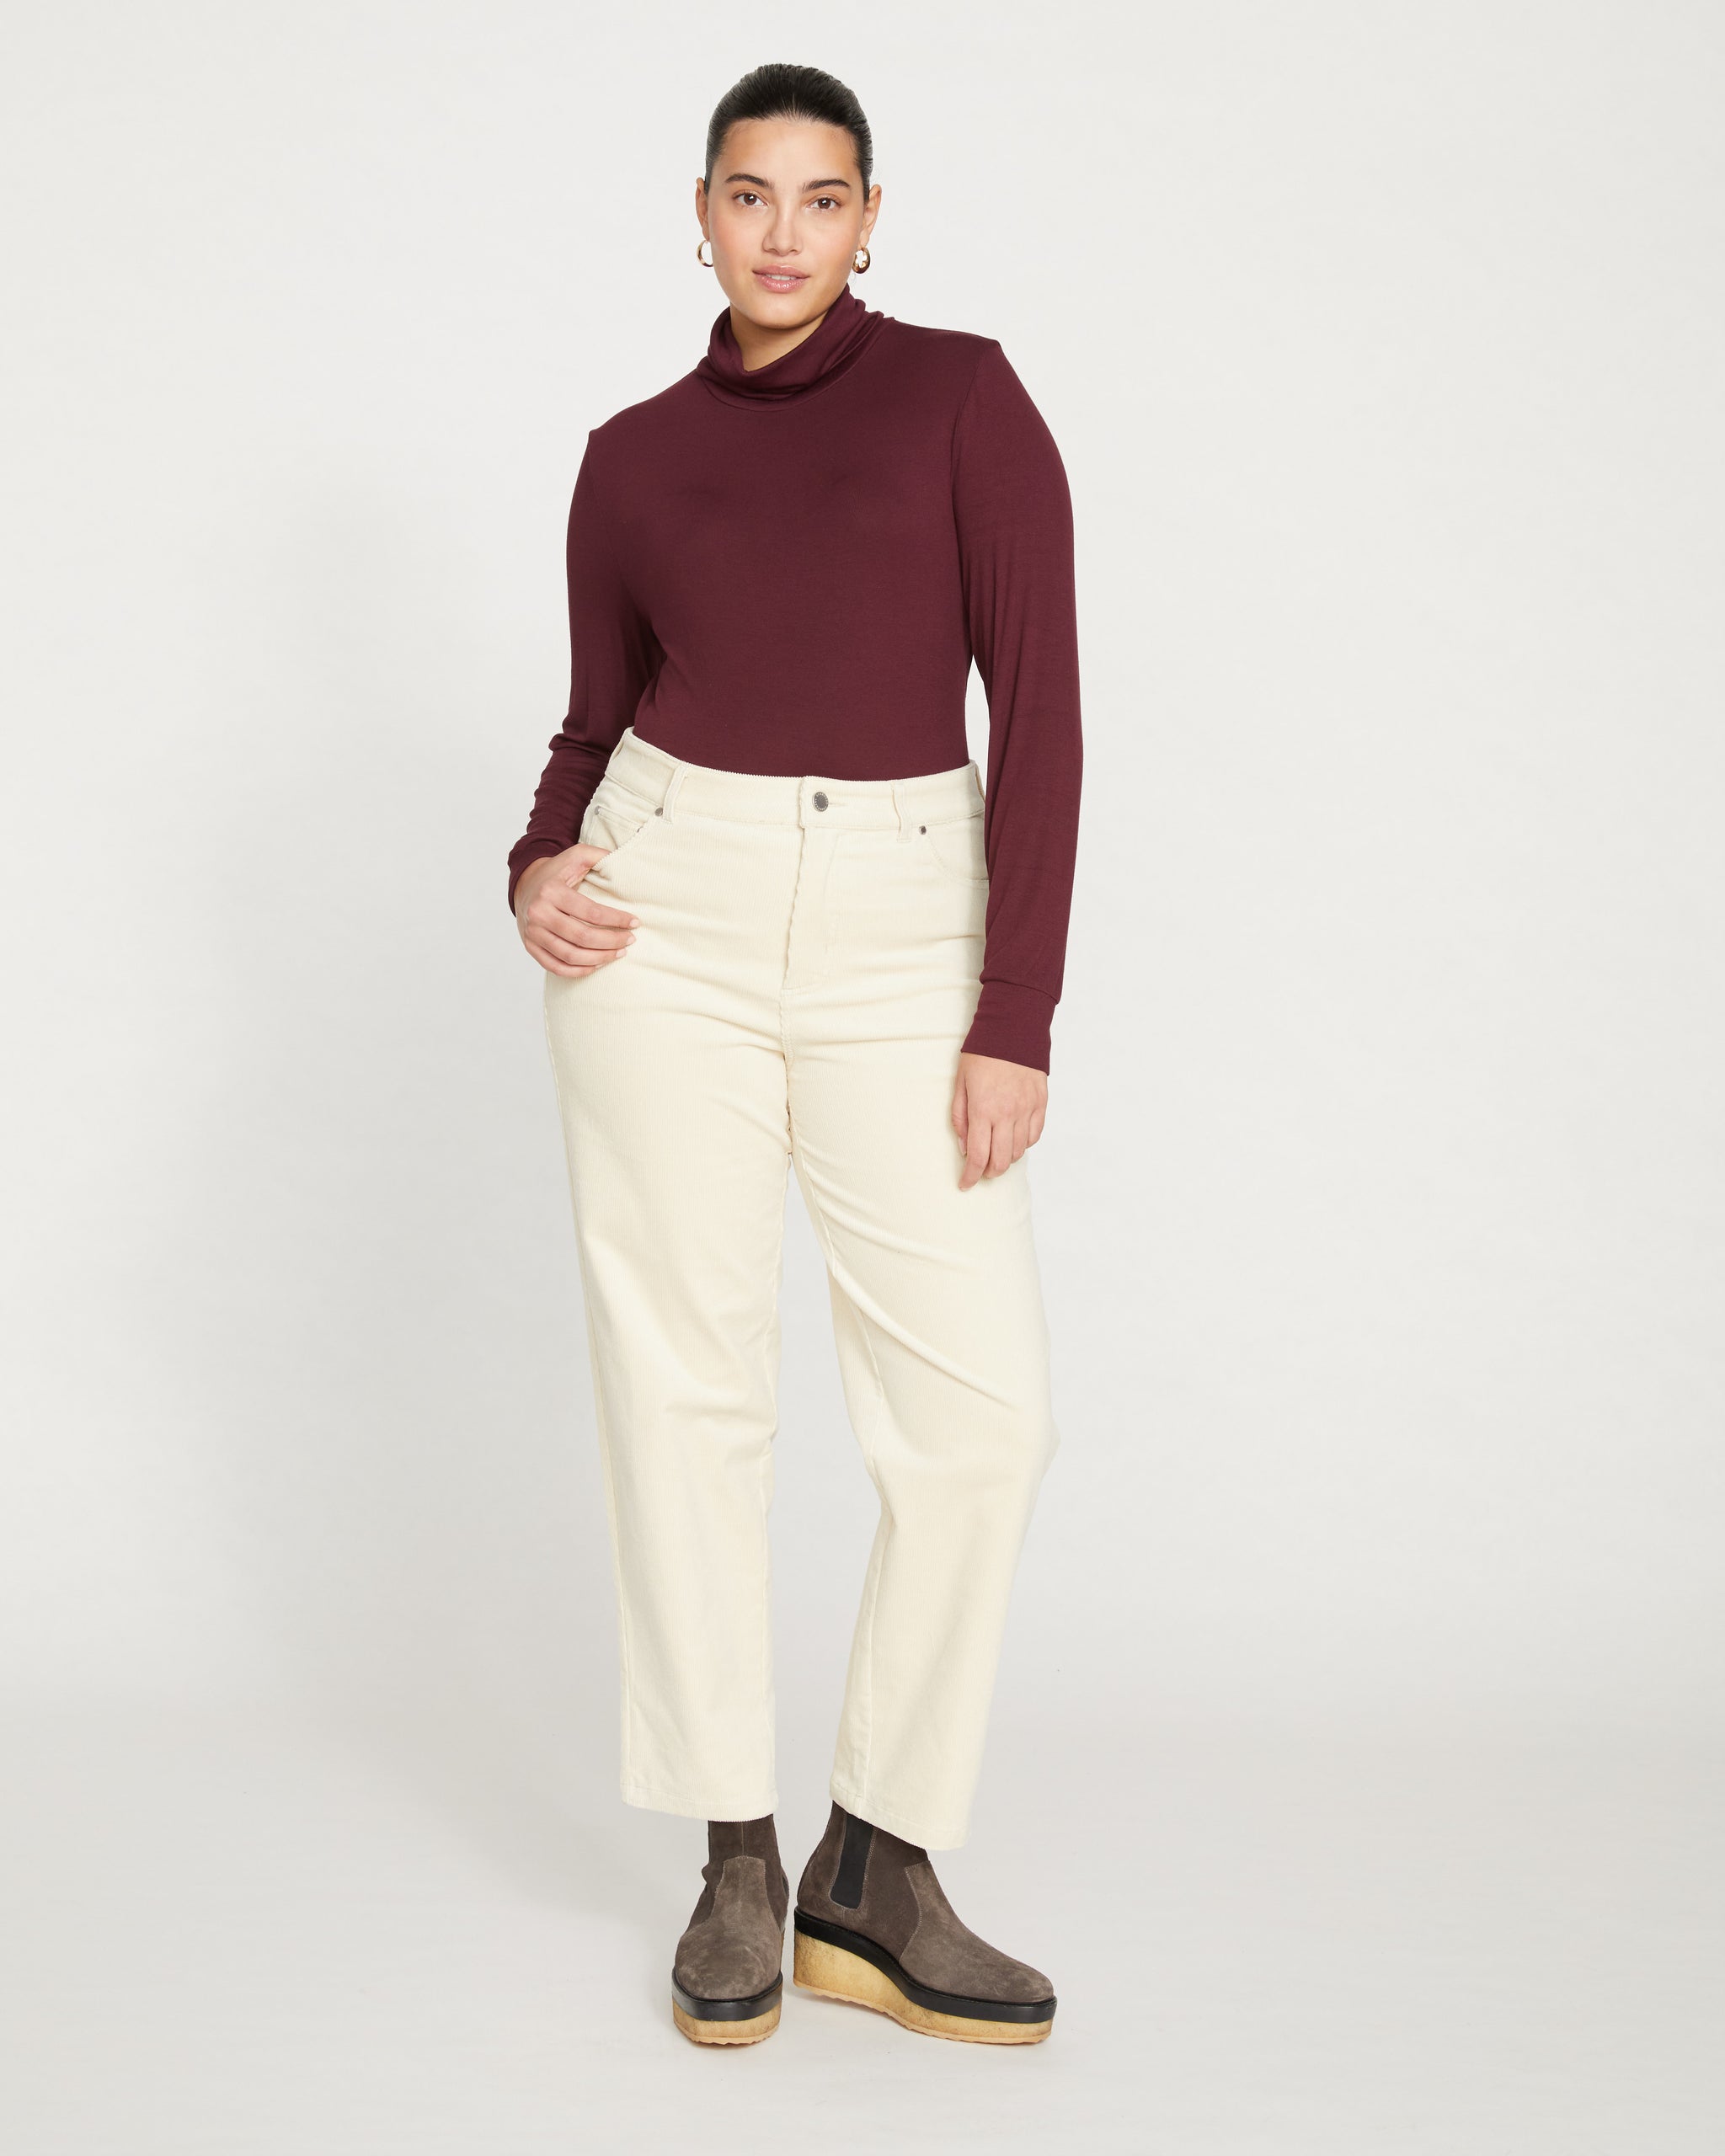 High-waisted corduroy trousers - beige